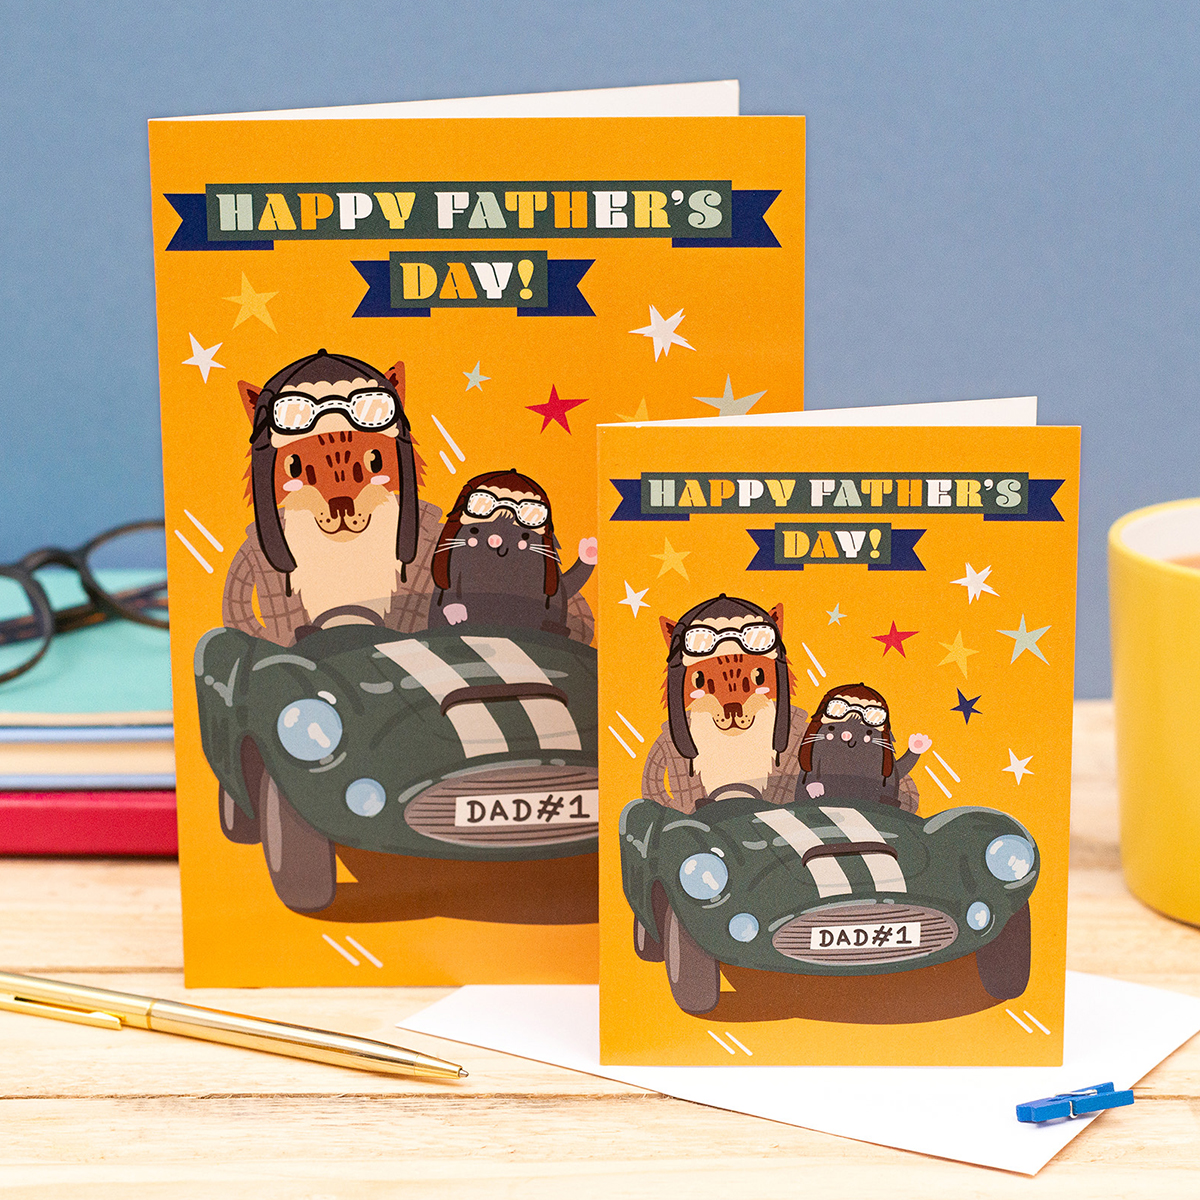 Illustrated Father's Day cards